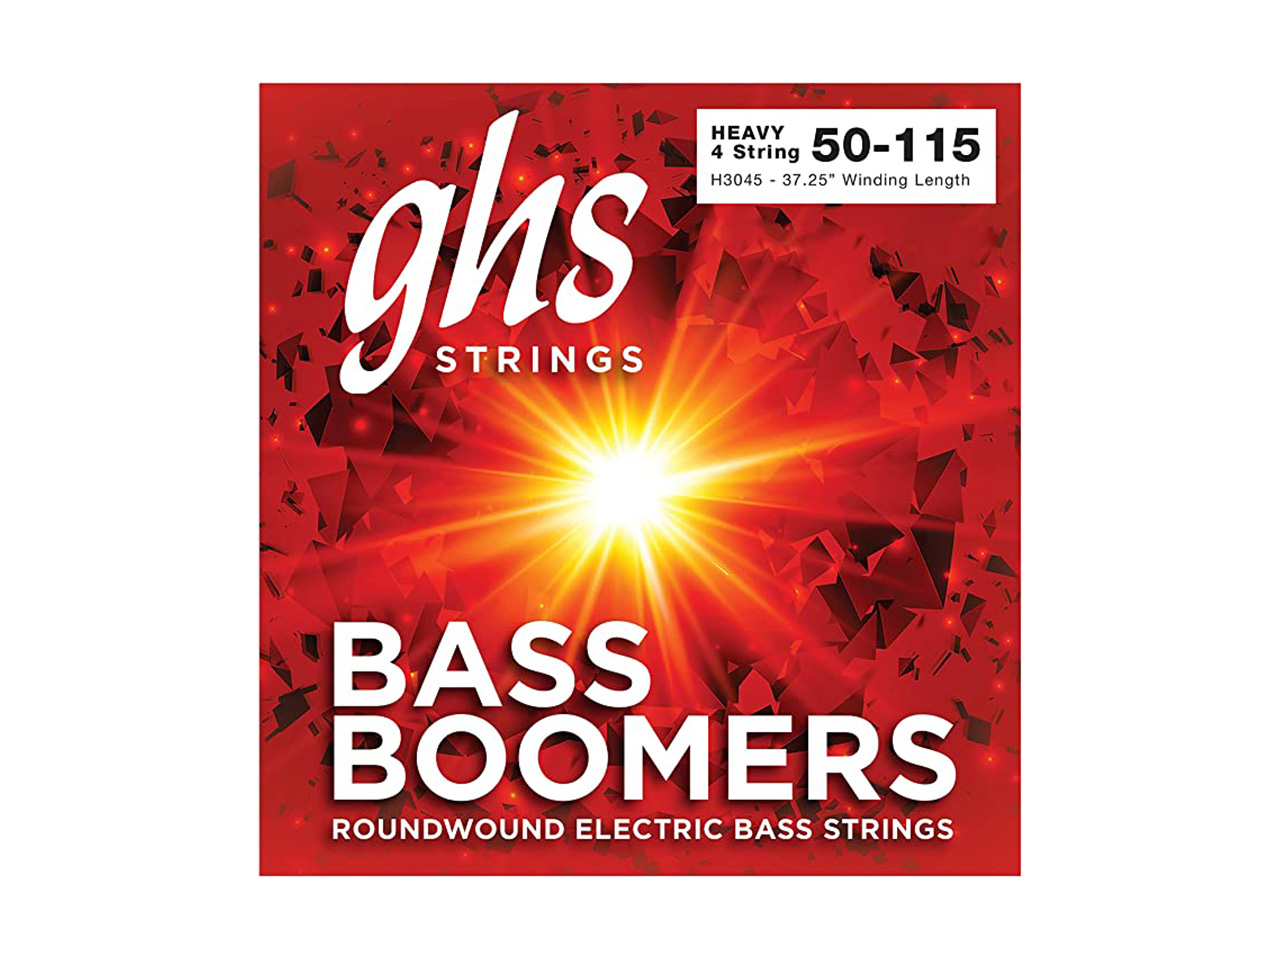 ghs(ジーエイチエス) Bass Boomers®Heavy H3045 / 50-115 (エレキベース弦/Long Scale)